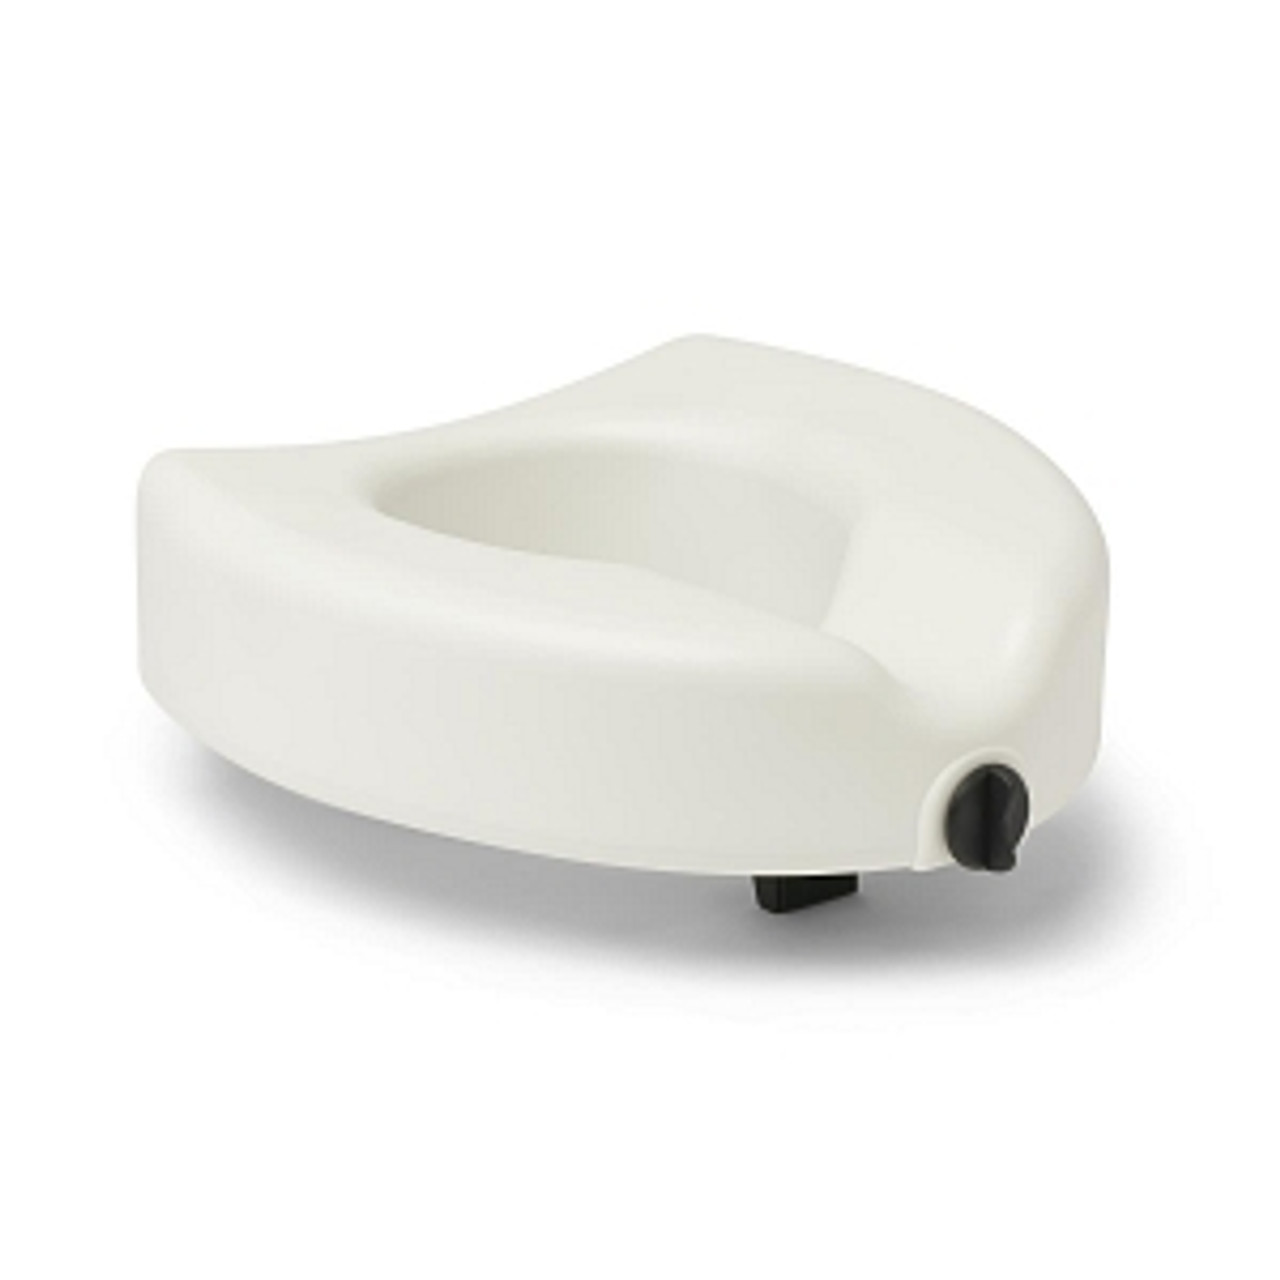 Front clamping mechanism locks the seat onto the toilet so you don't have to worry about it coming loose or shifting during use or transfer
Wide, contoured surface raises seat level by 5"
Fit most toilet bowls from 11" to 14" long
Some items treated with Microban* antimicrobial protection